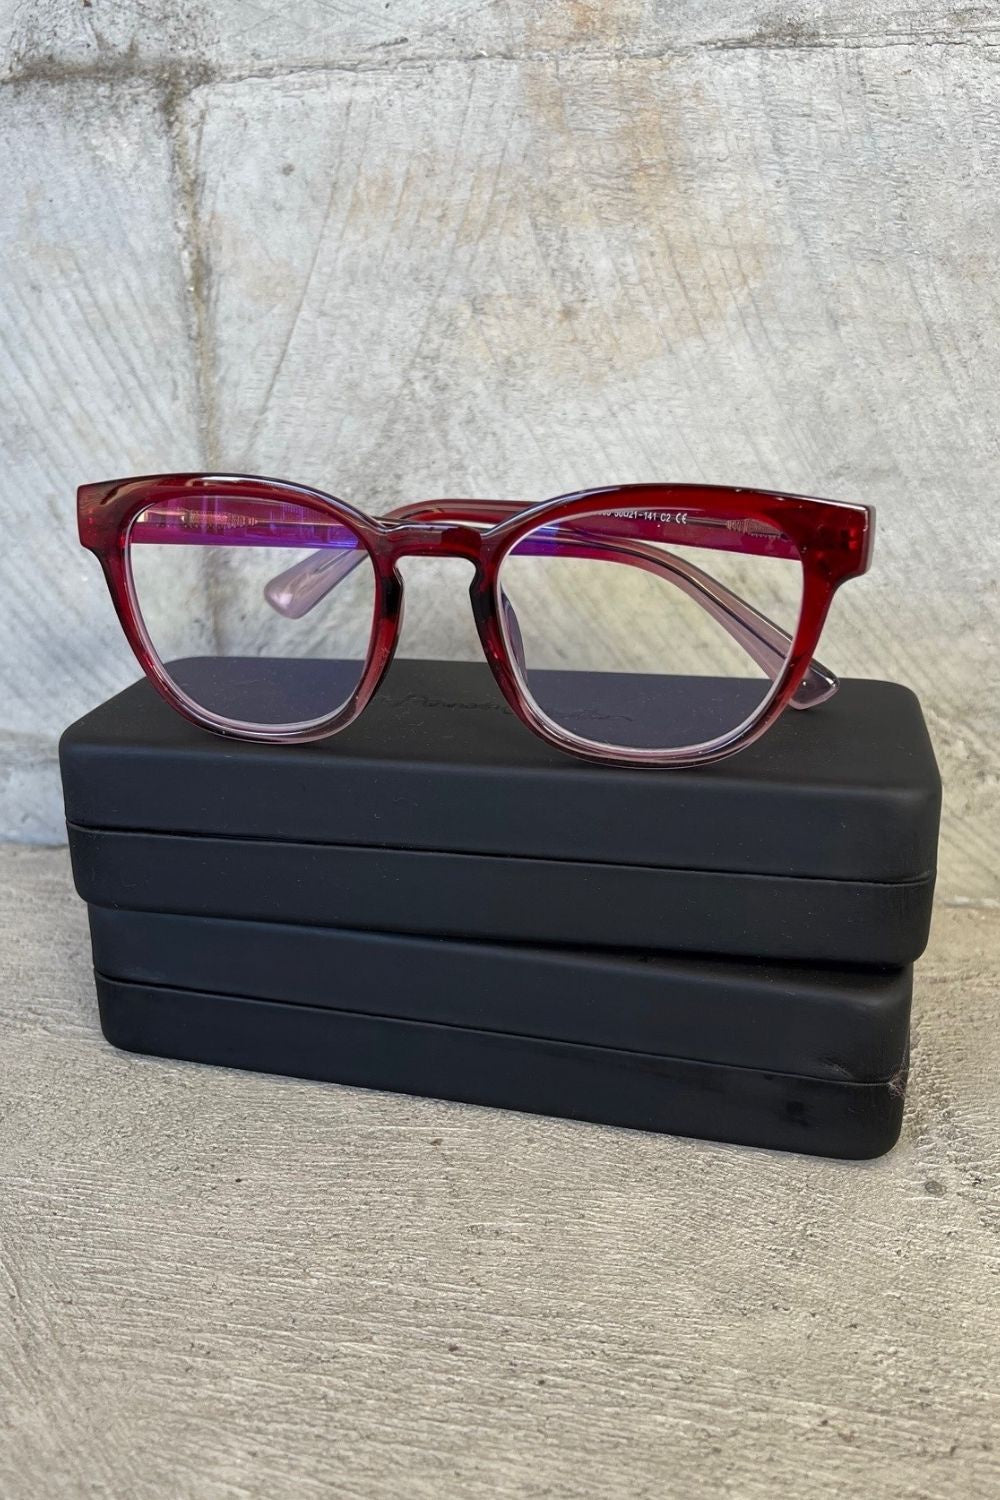 AS Reading Glasses - Red